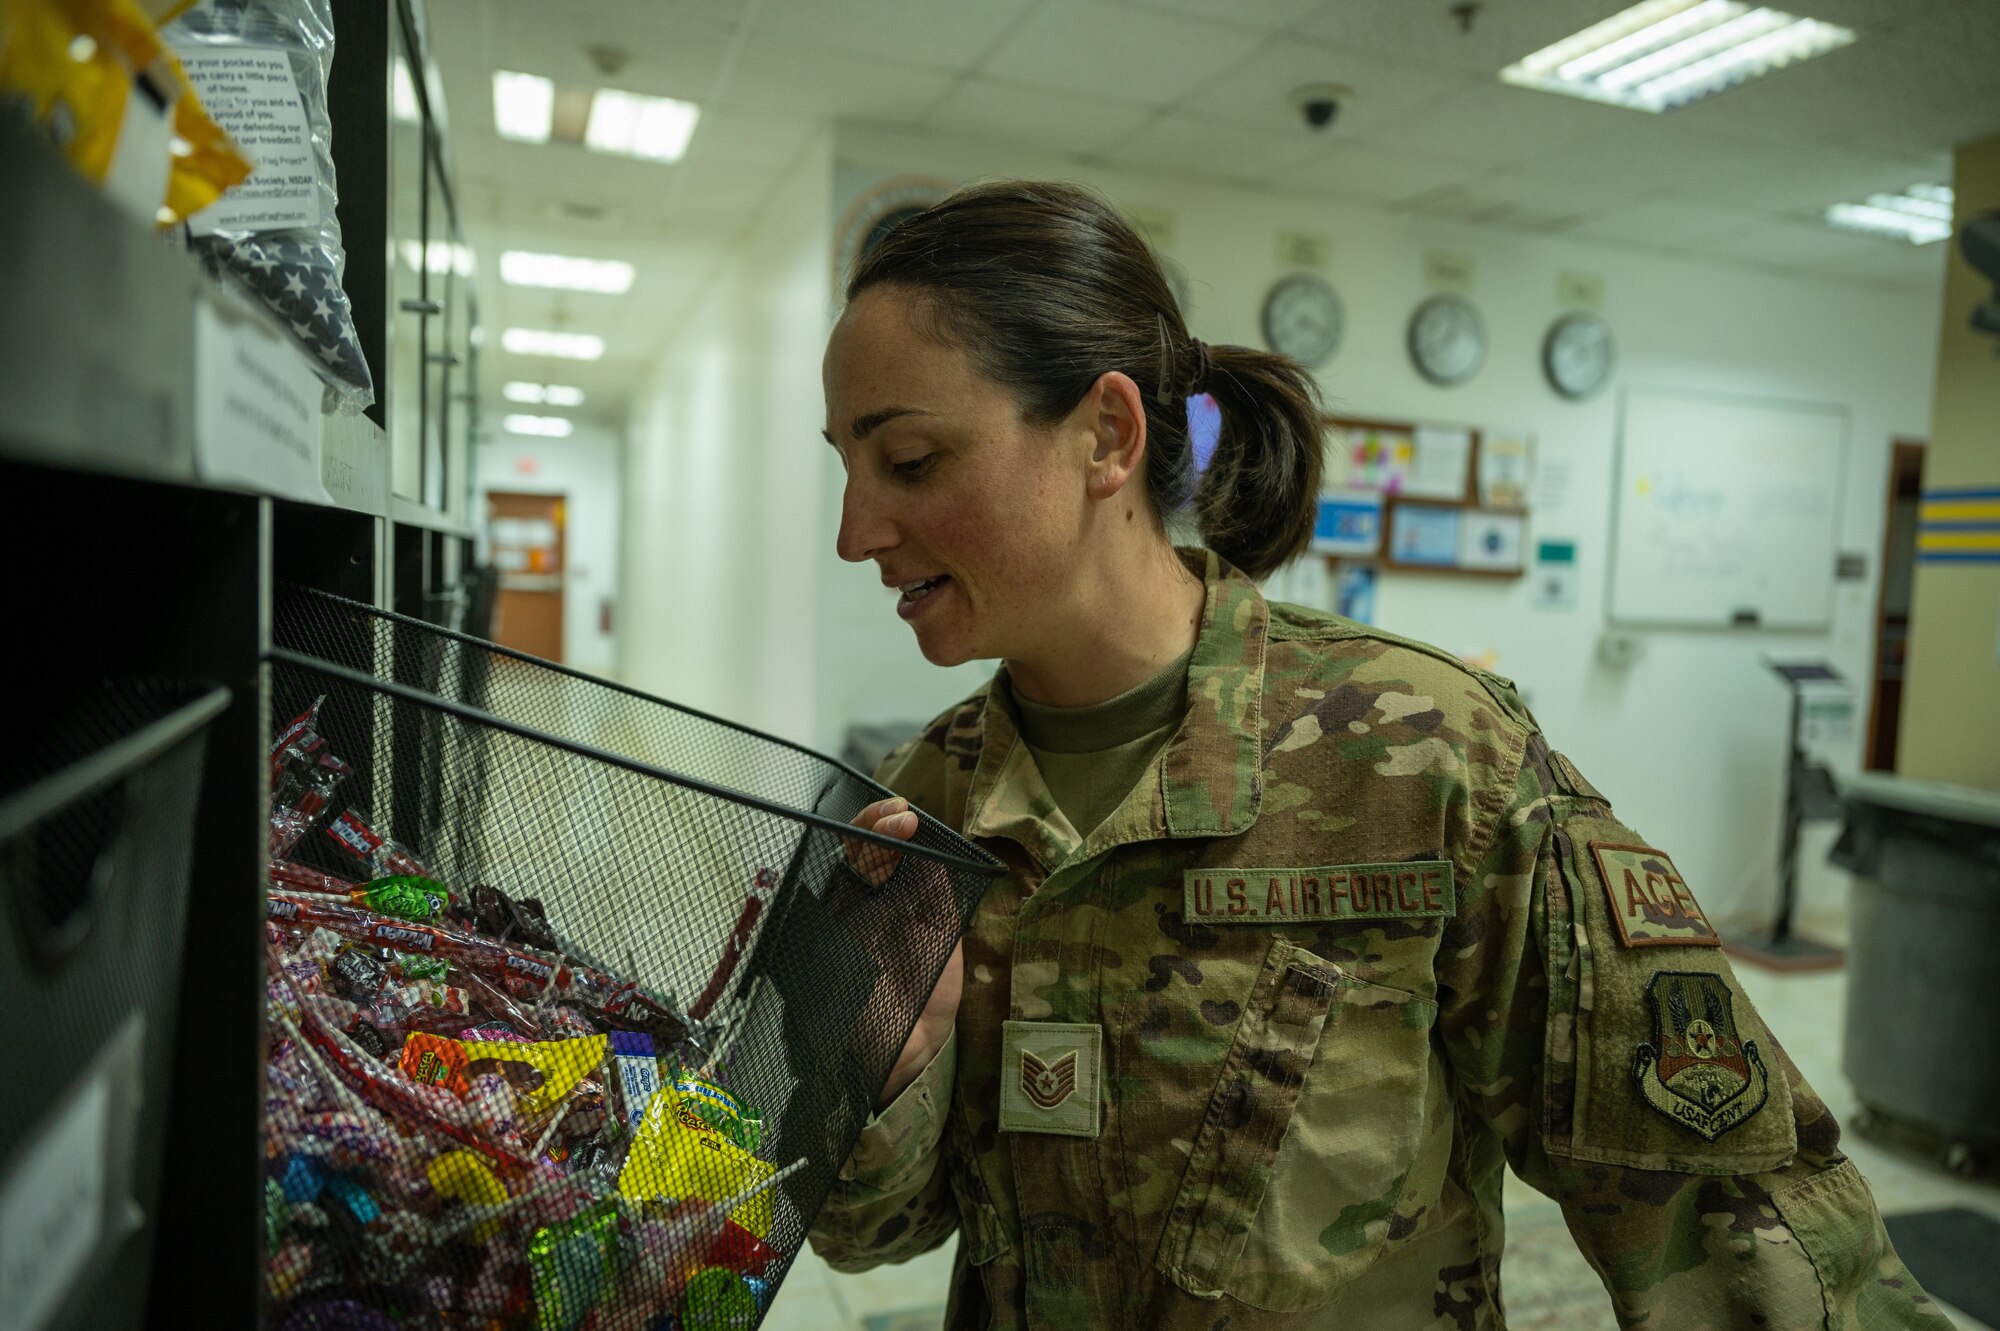 The Rock Chapel at Ali Al Salem Air Base offers service members and coalition partners a variety of religious services and resources to strengthen spiritual fitness, support overall wellness and boost morale.